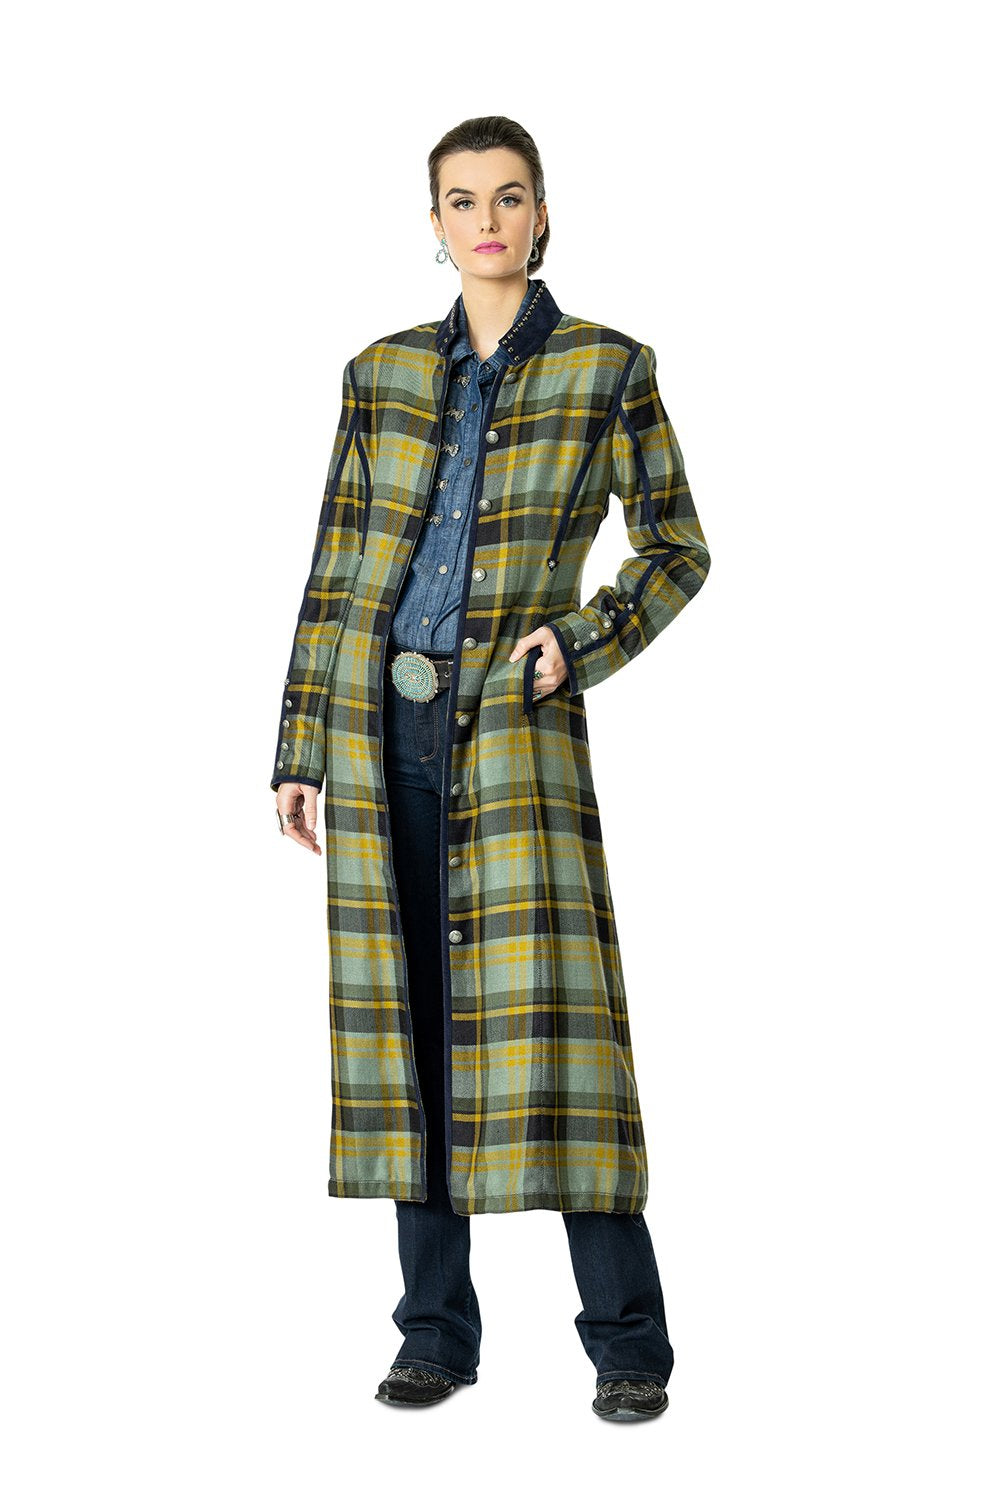 DDR Rodgers Plaid Duster 6Whiskey six whisky Taos Holiday Collection C2762